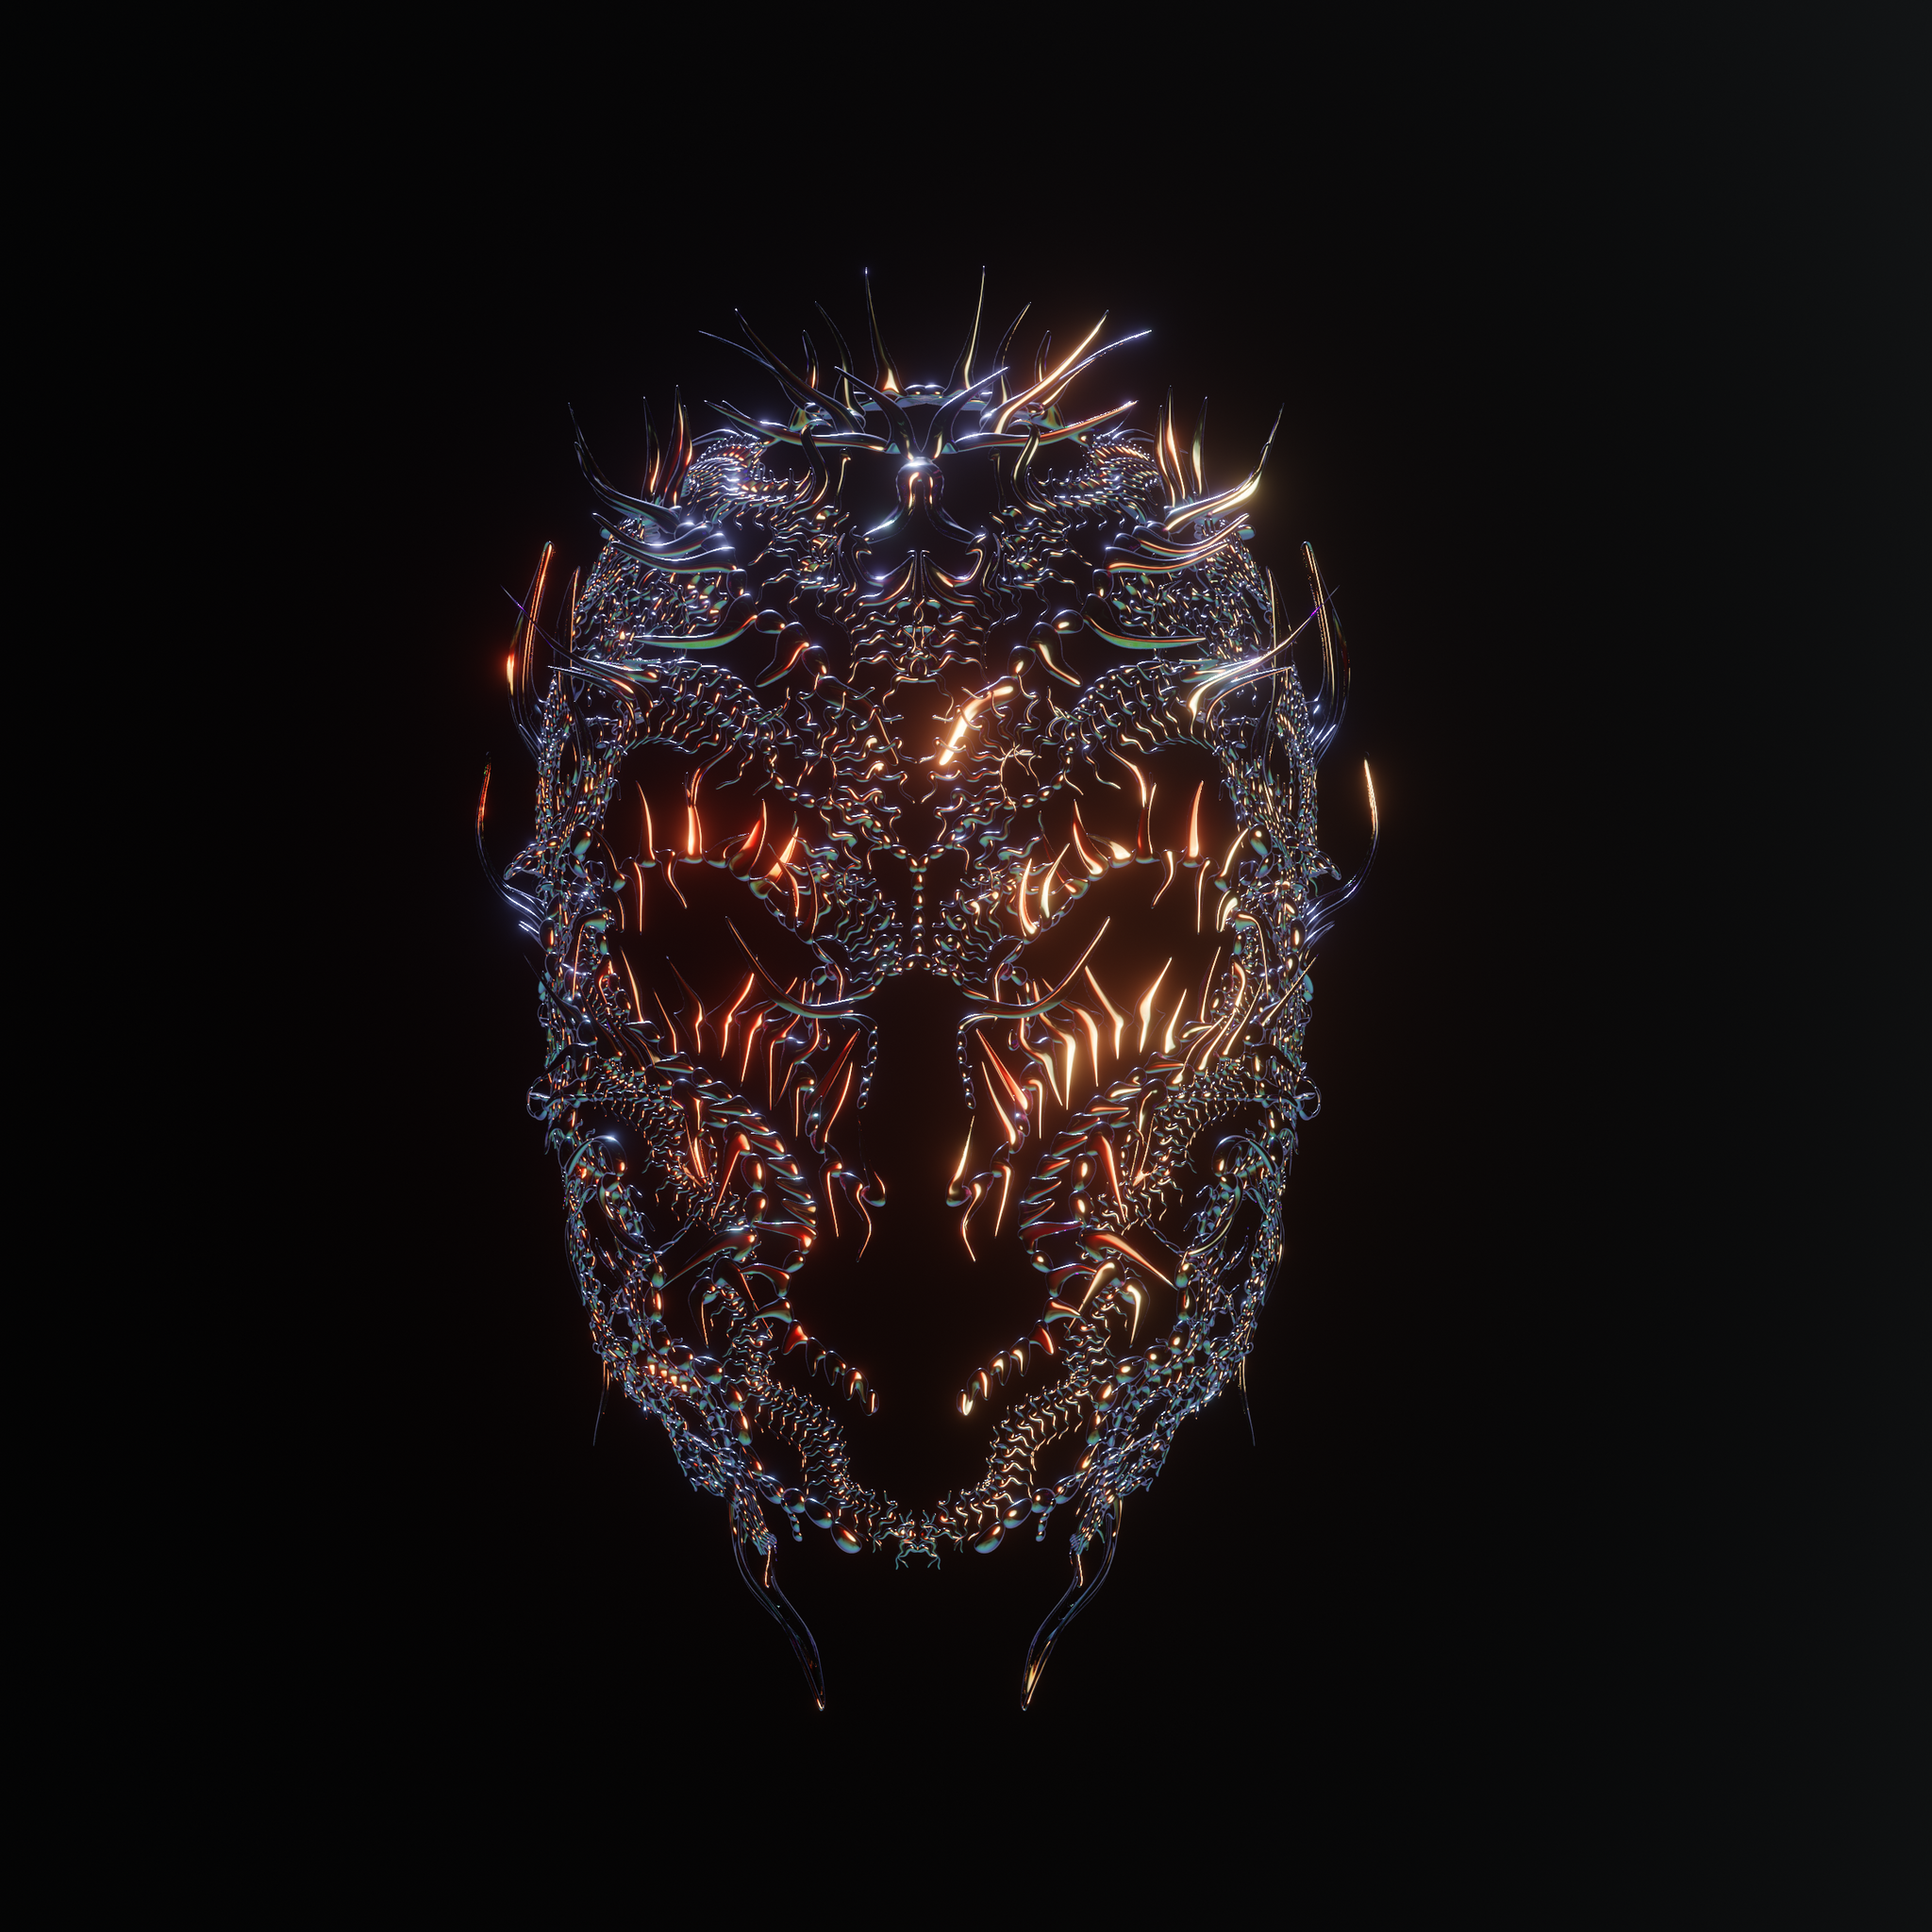 Abstract Mask - OBJ File